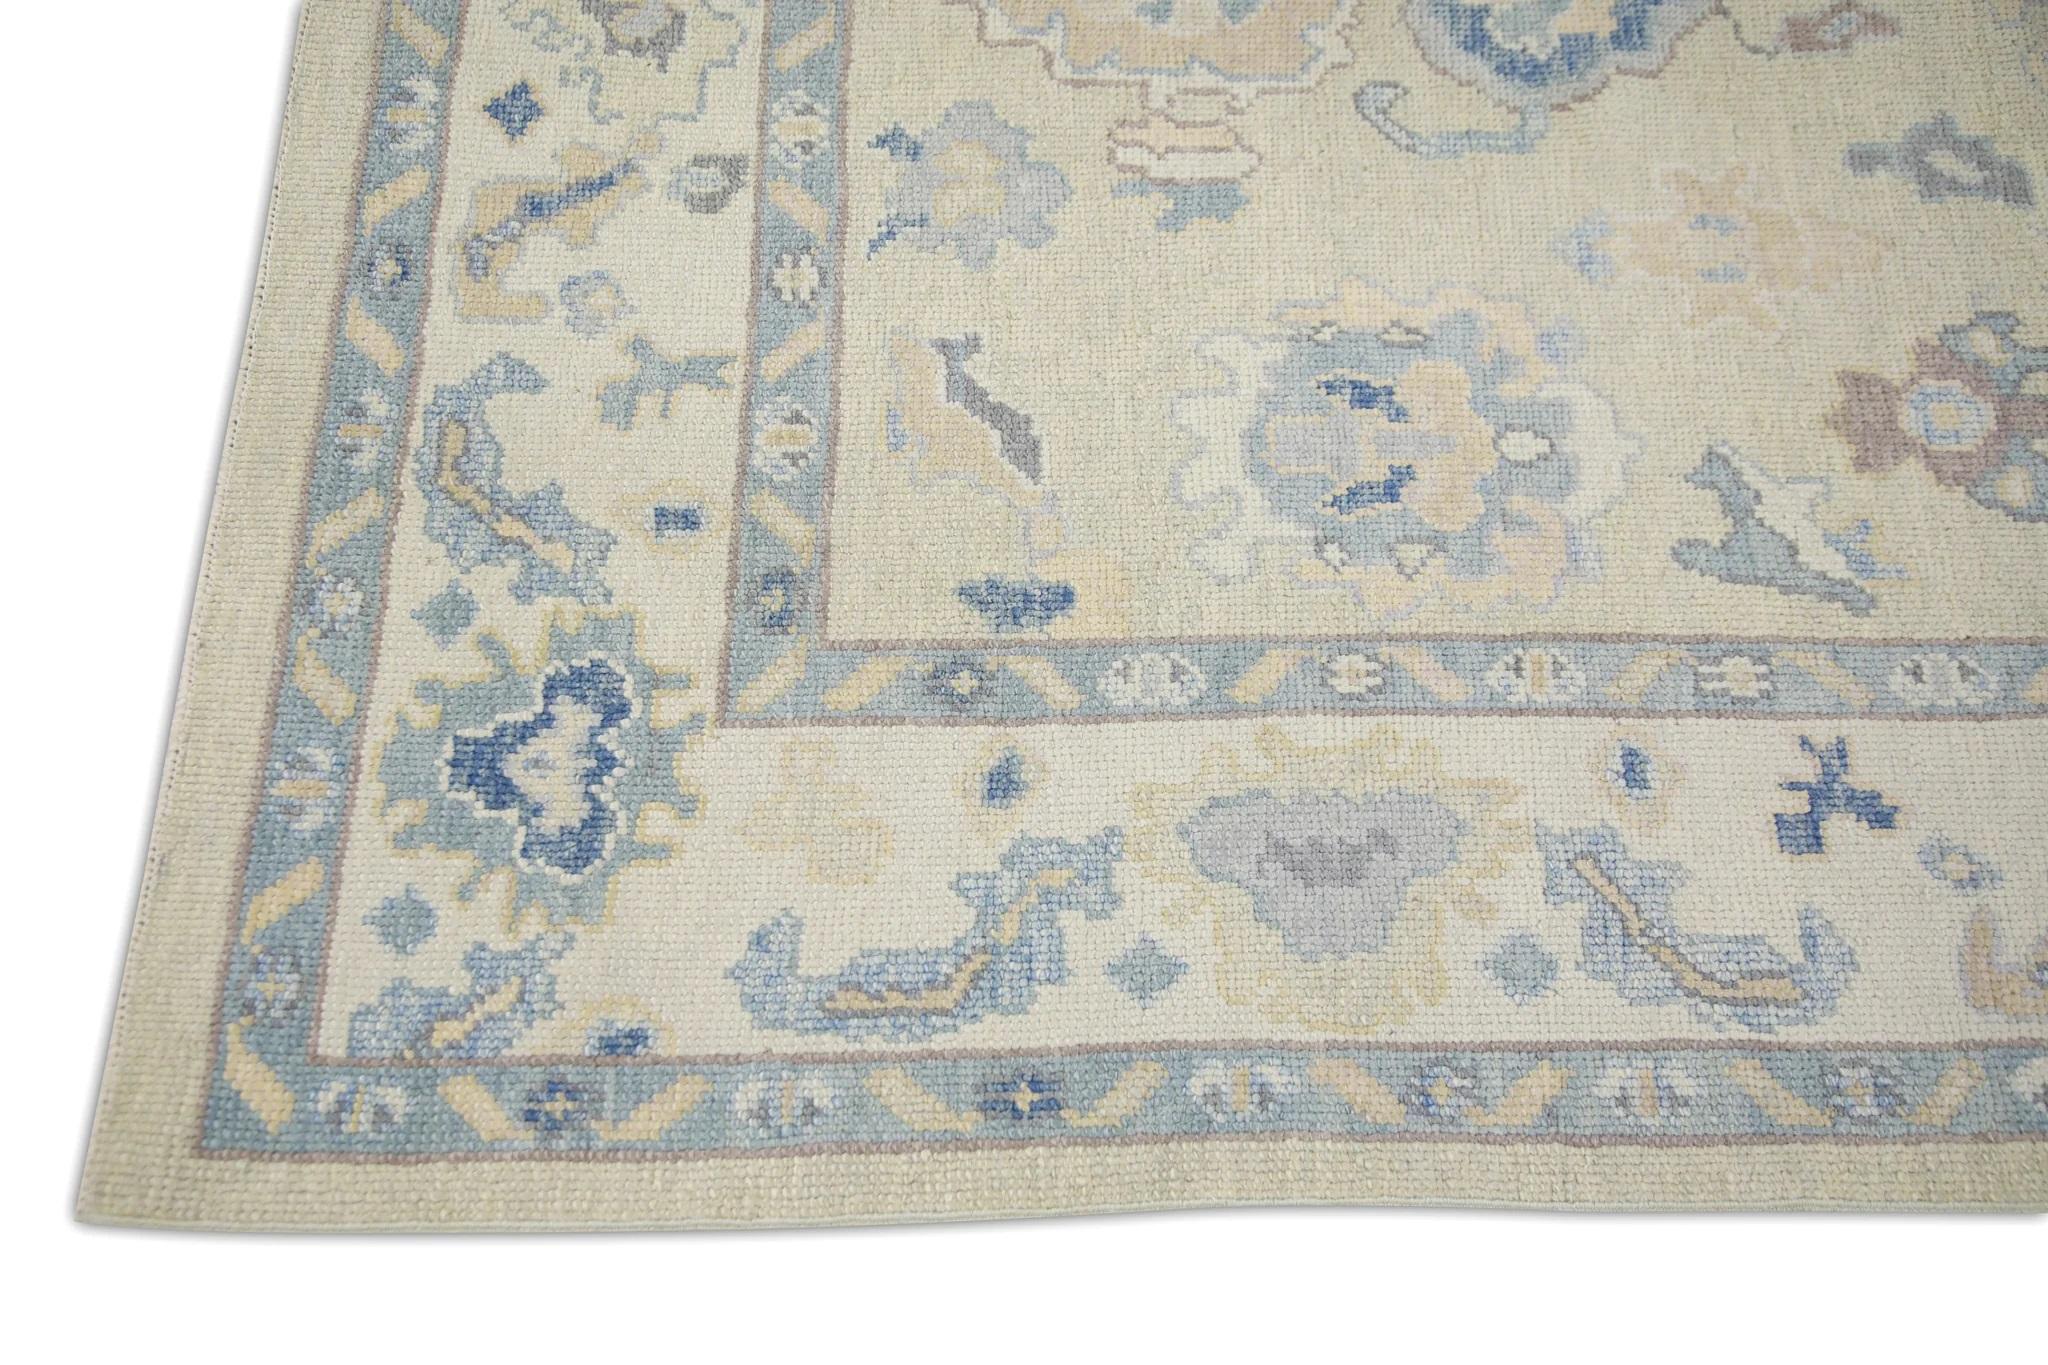 Vegetable Dyed Cream Handwoven Wool Turkish Oushak Rug in Blue Floral Design 6' x 8'10